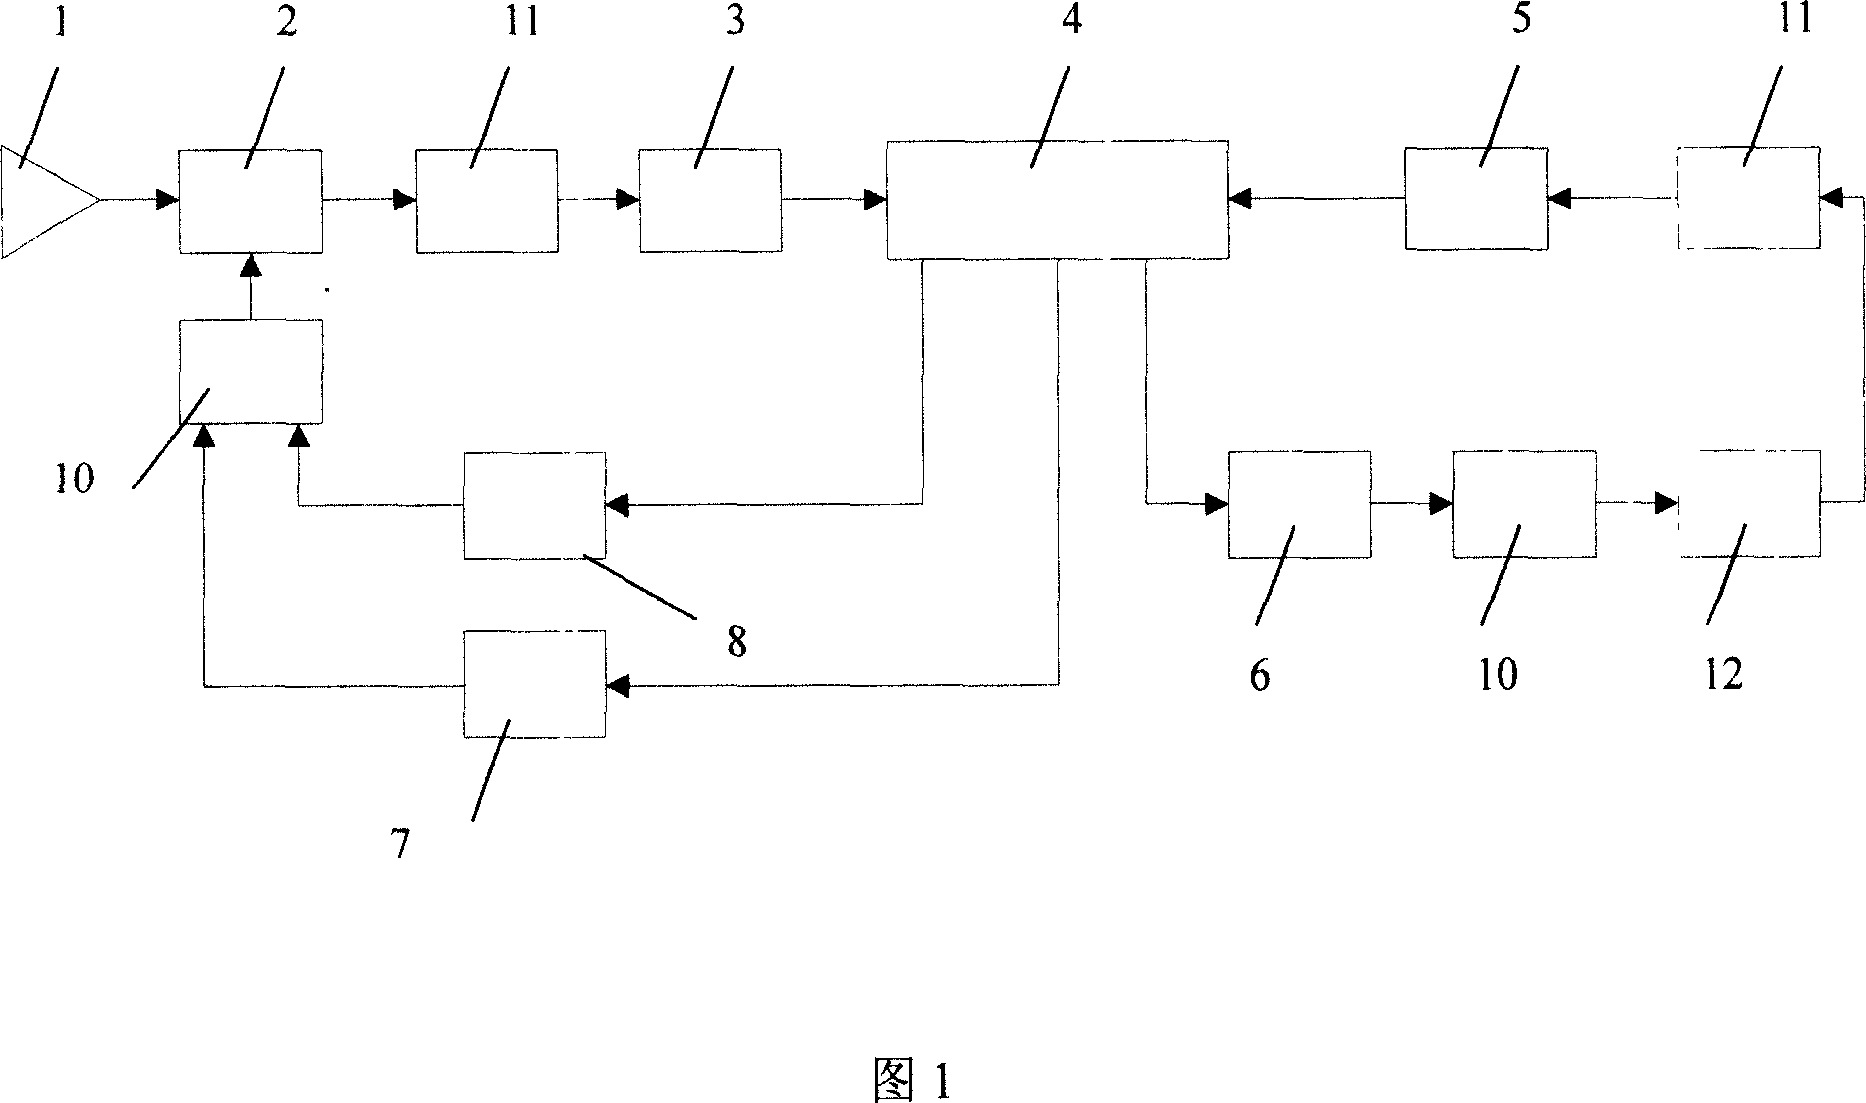 Air spring superlow frequency vibration isolating method and apparatus based on differential electromagnetic actuator